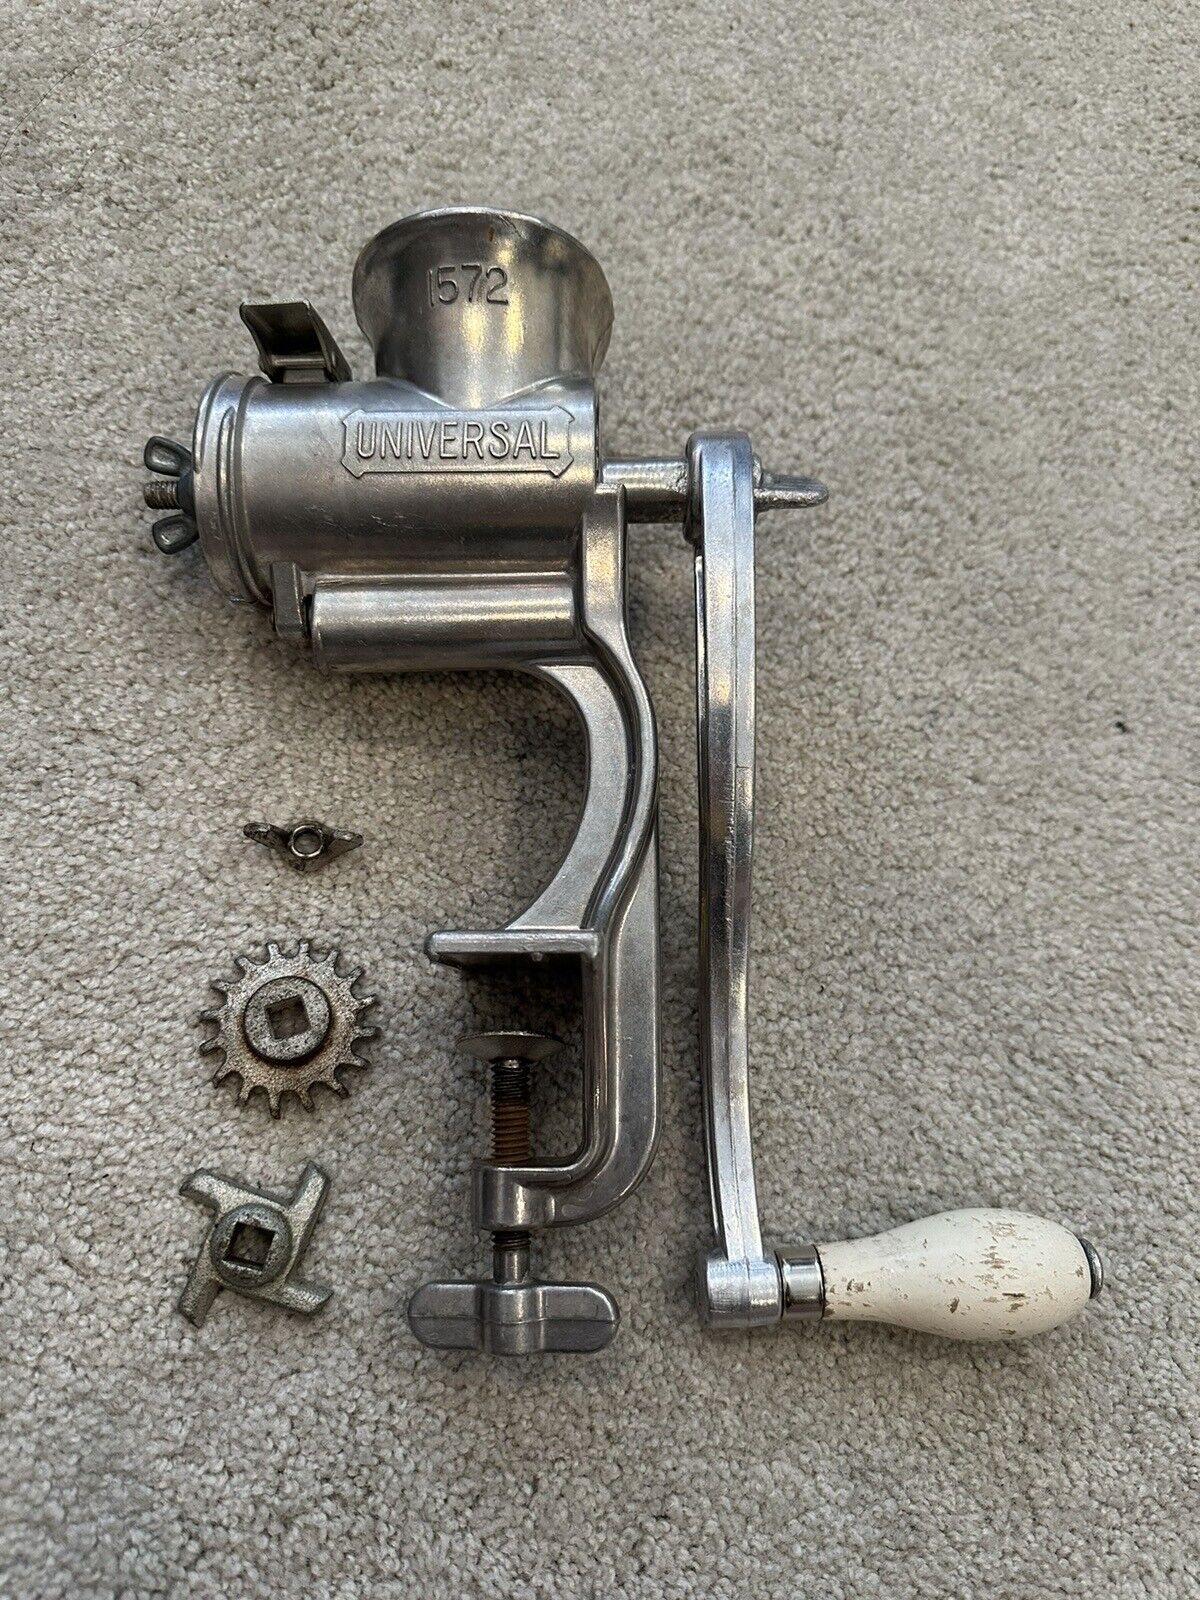 Vintage Universal No. 1572 Meat and Food Grinder w/3 Cutter Blades